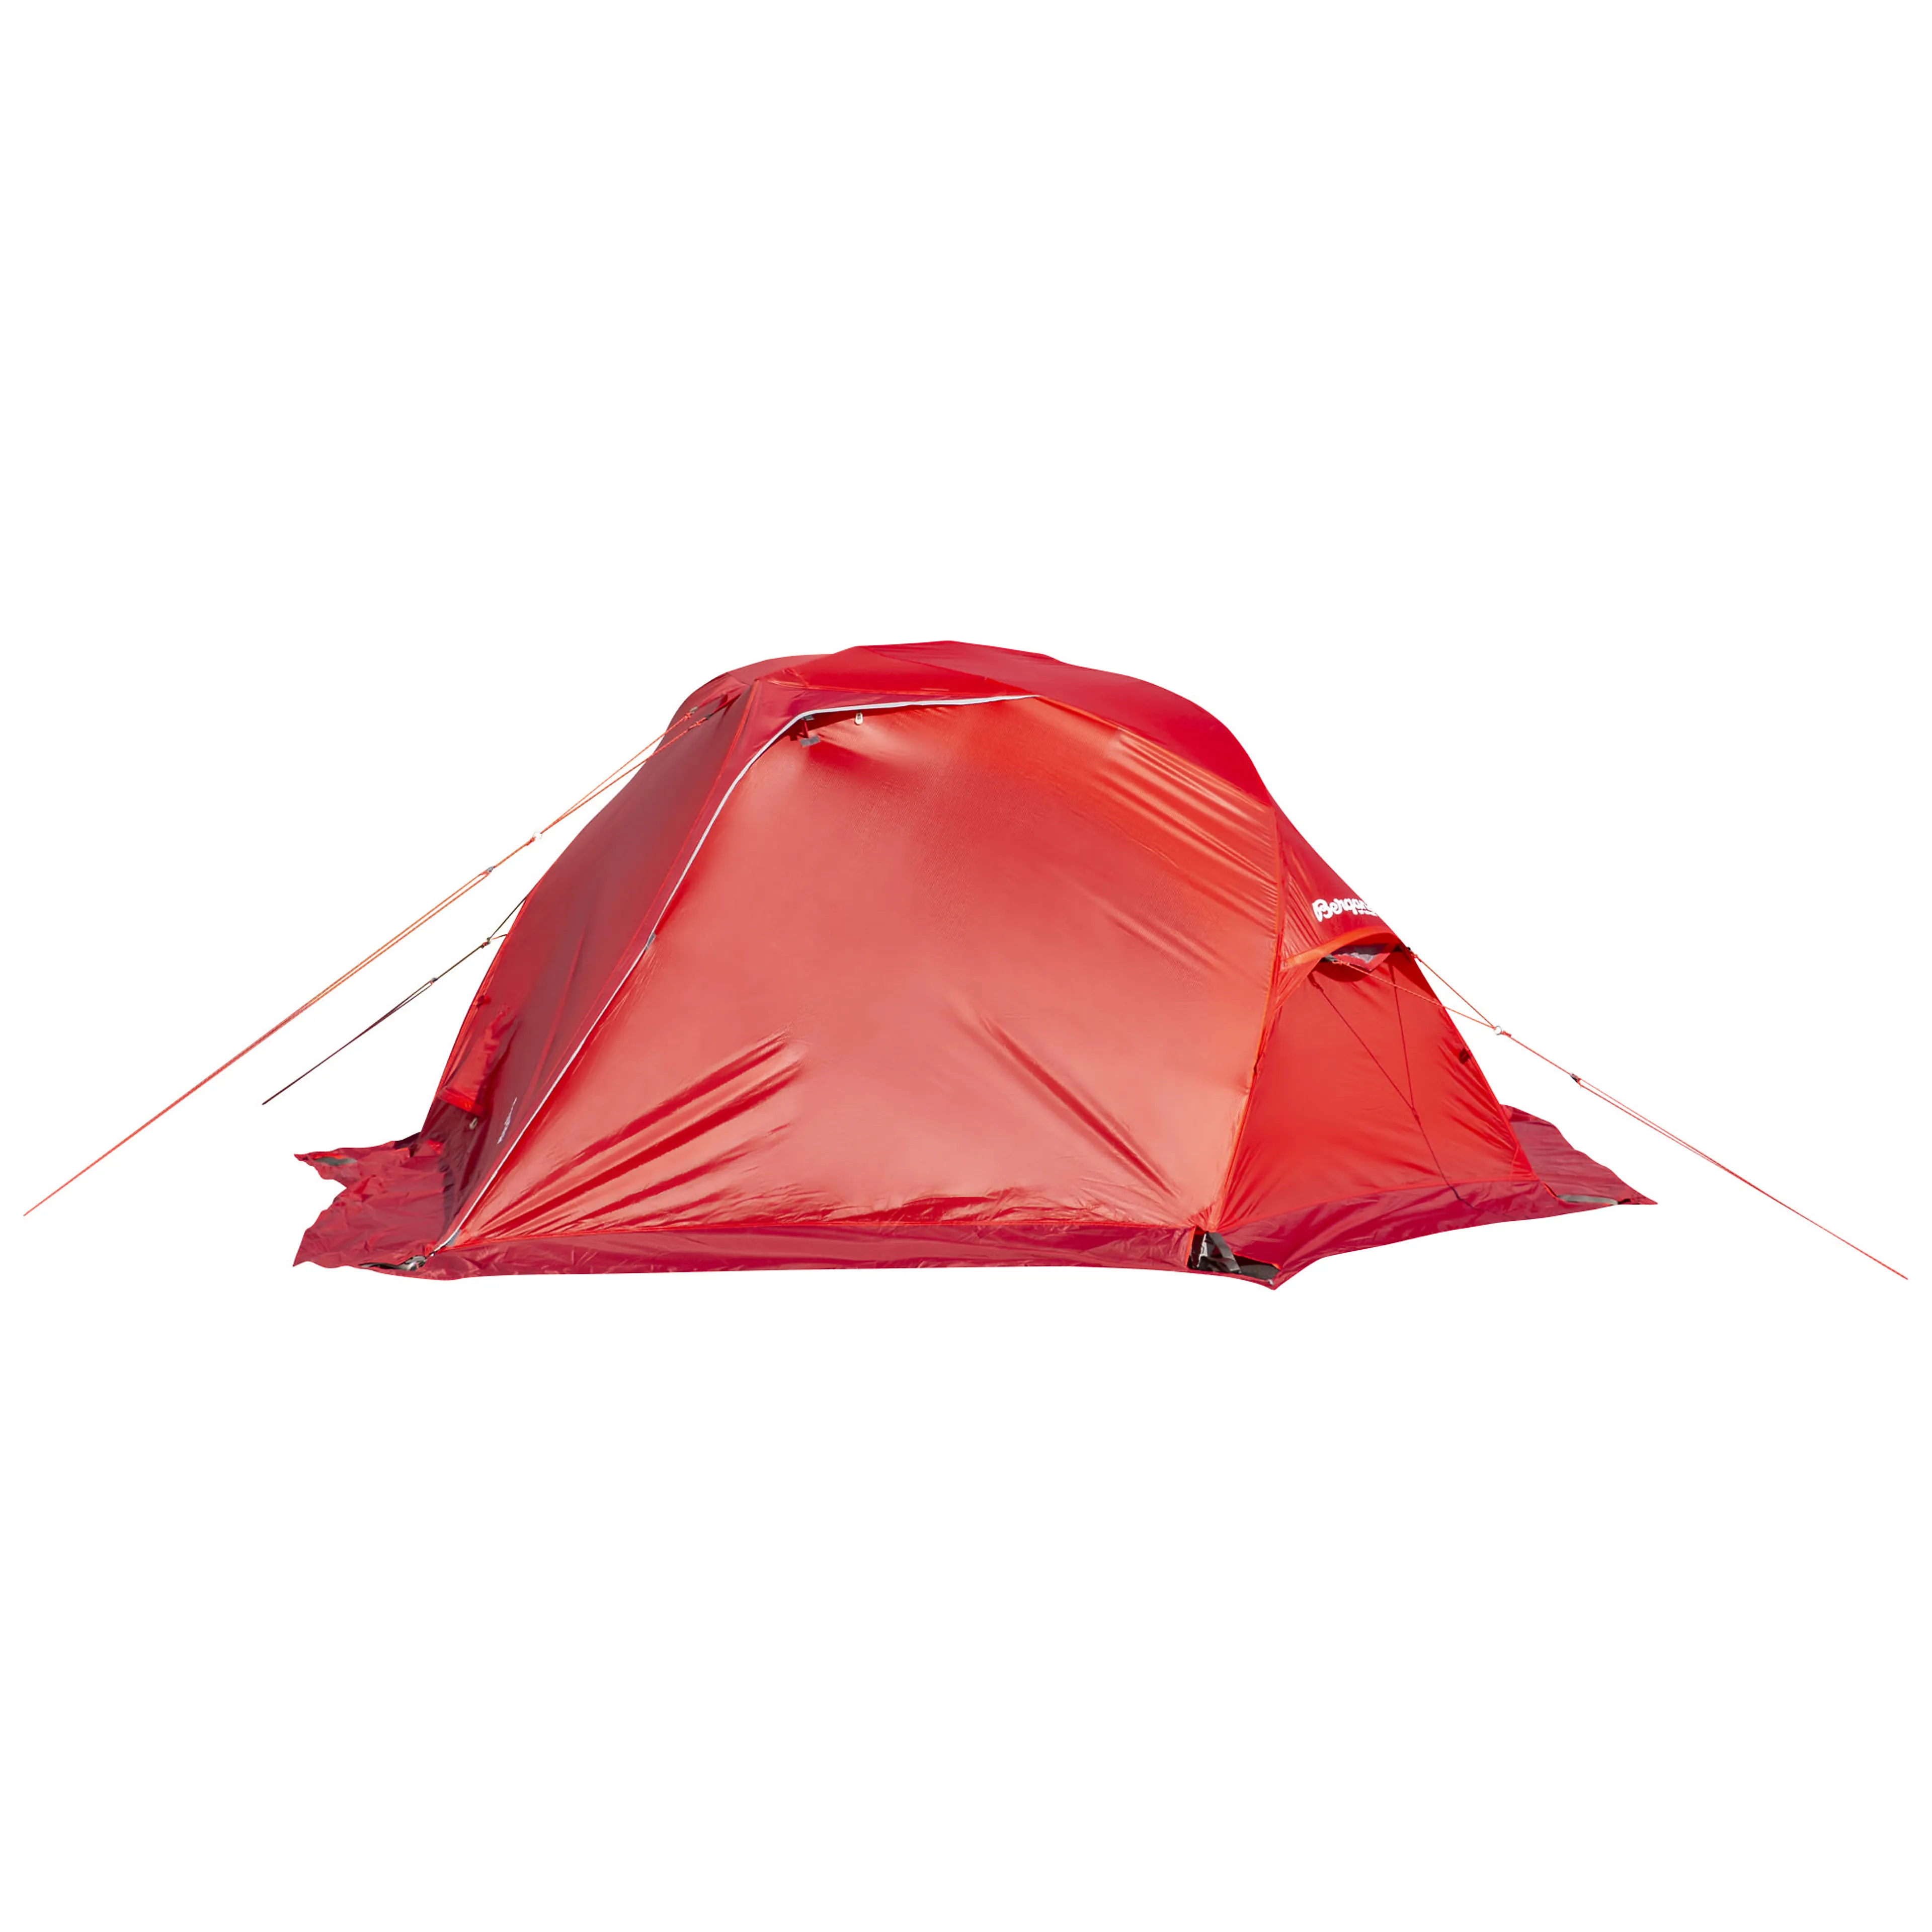 Helium Expedition Dome 2 Tent